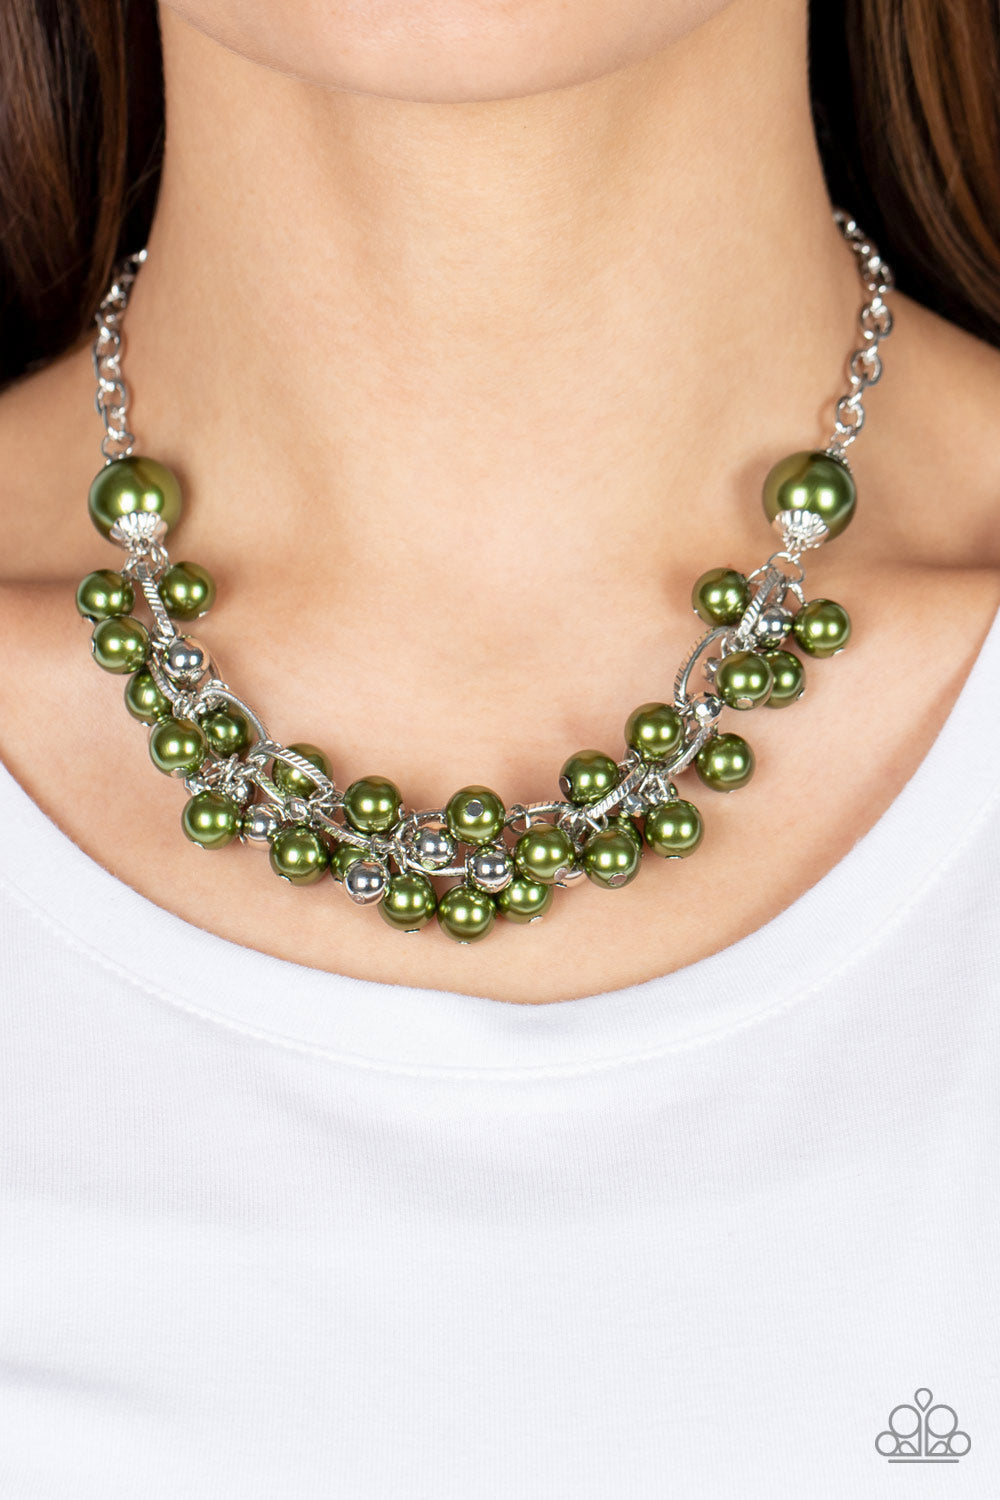 Party Crasher - Green Necklace - Paparazzi Accessories